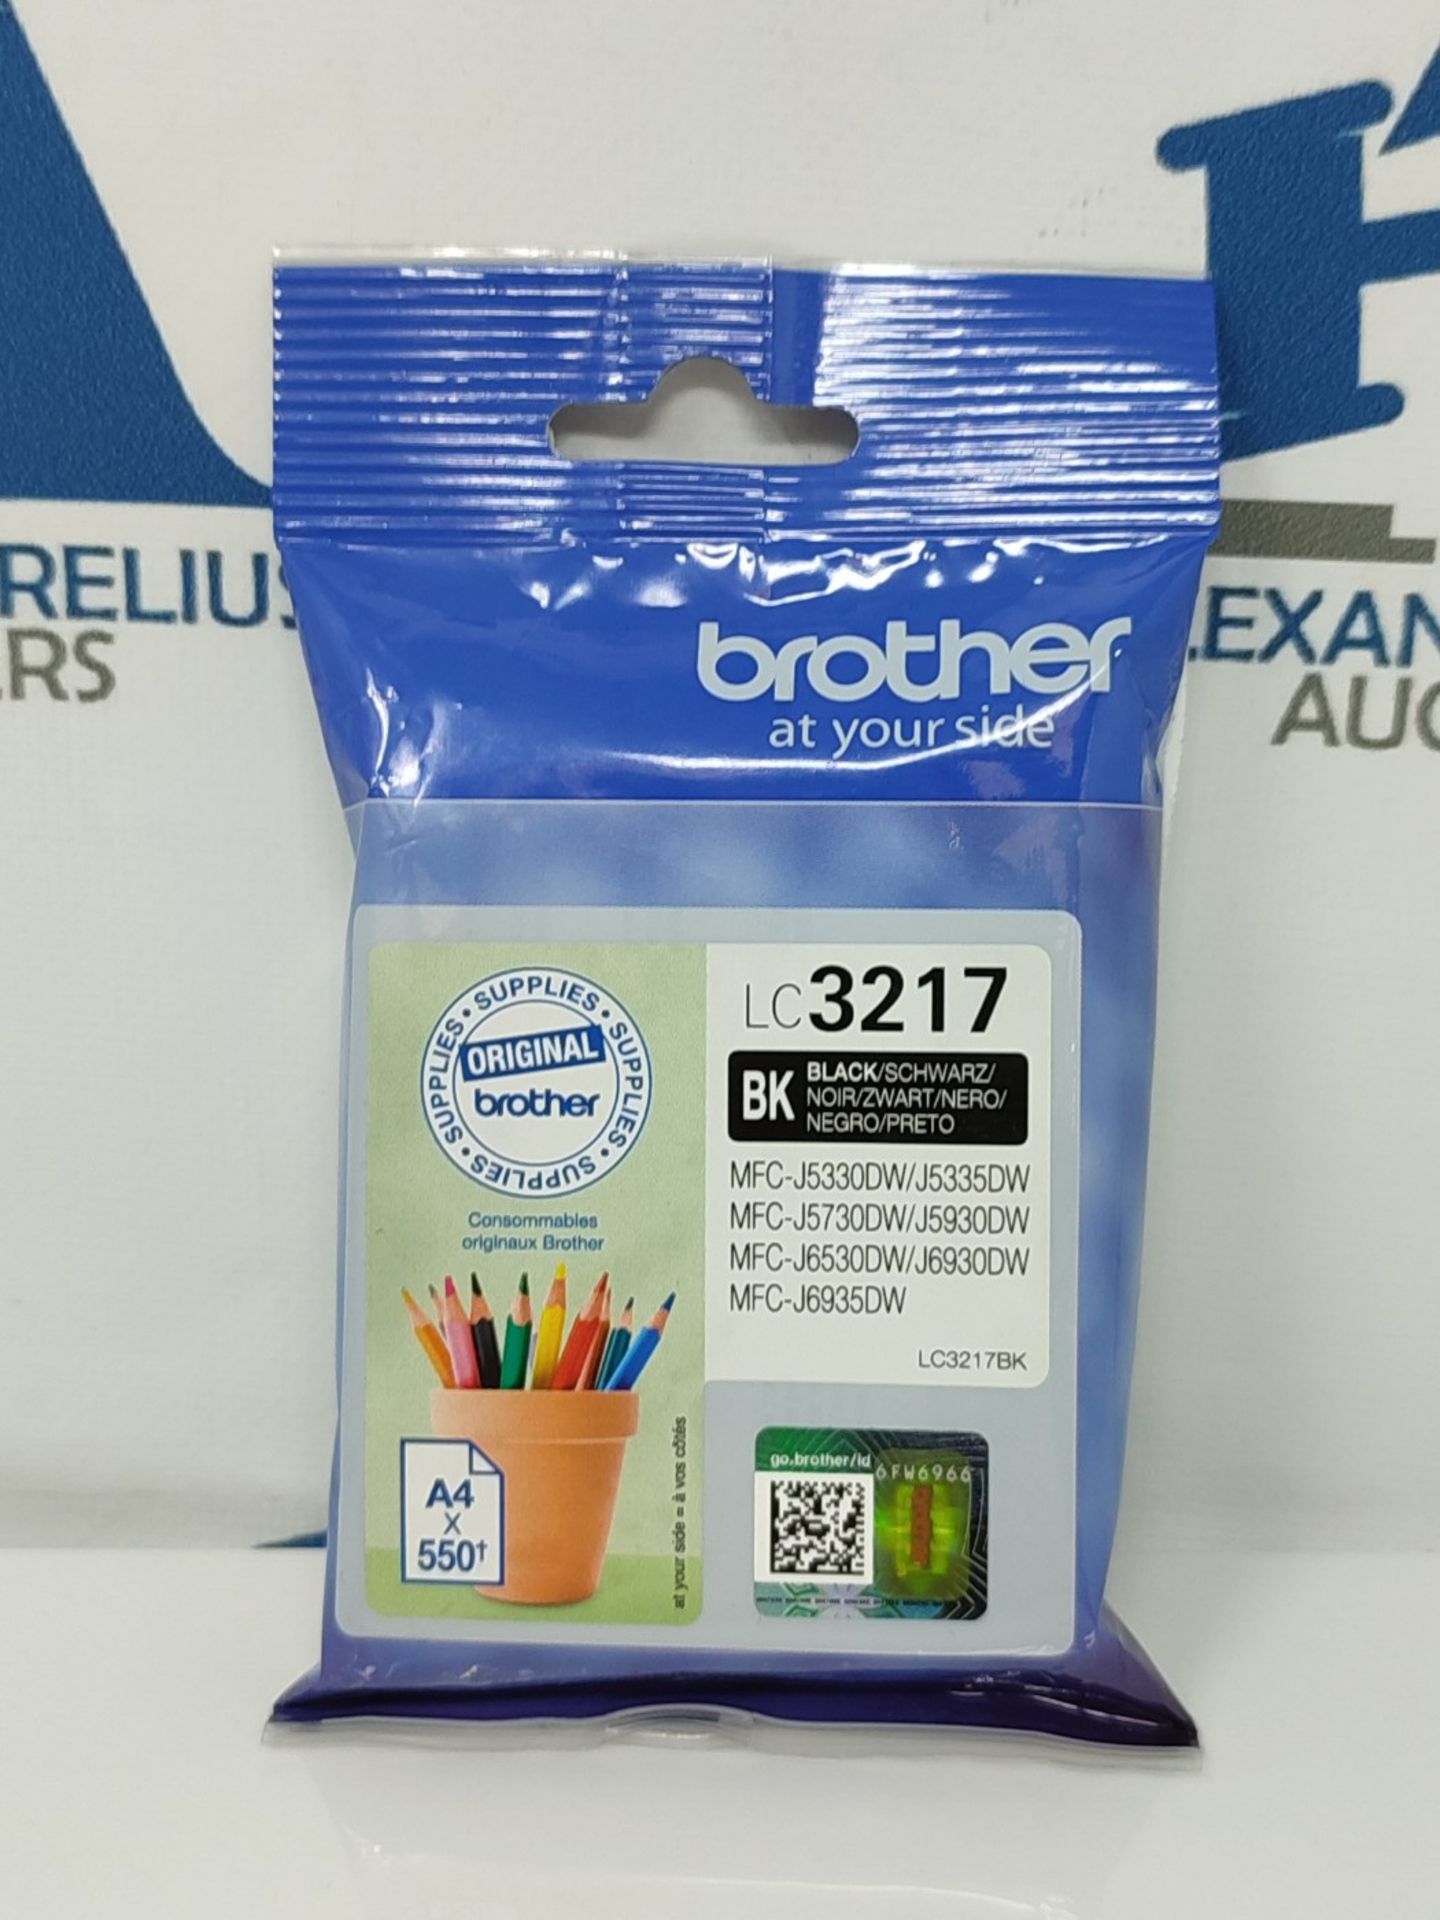 Brother LC-3217BK Inkjet Cartridge, Black, Single Pack, Standard Yield, Includes 1 x I - Image 2 of 2